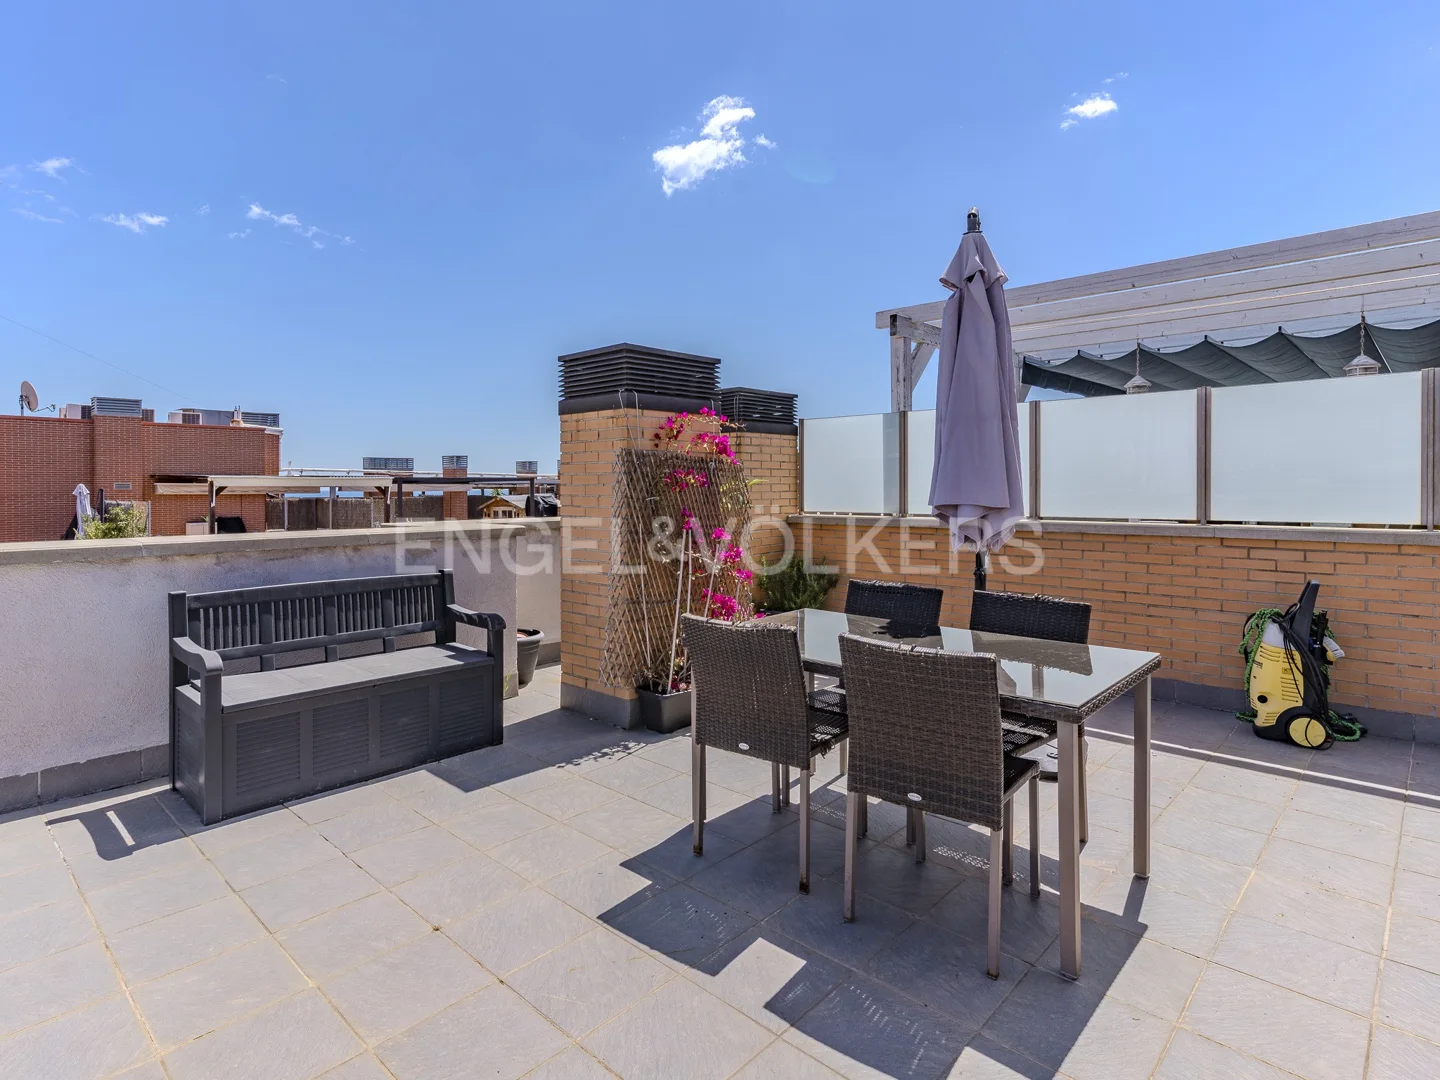 Big apartment with an impressive terrace and panoramic views